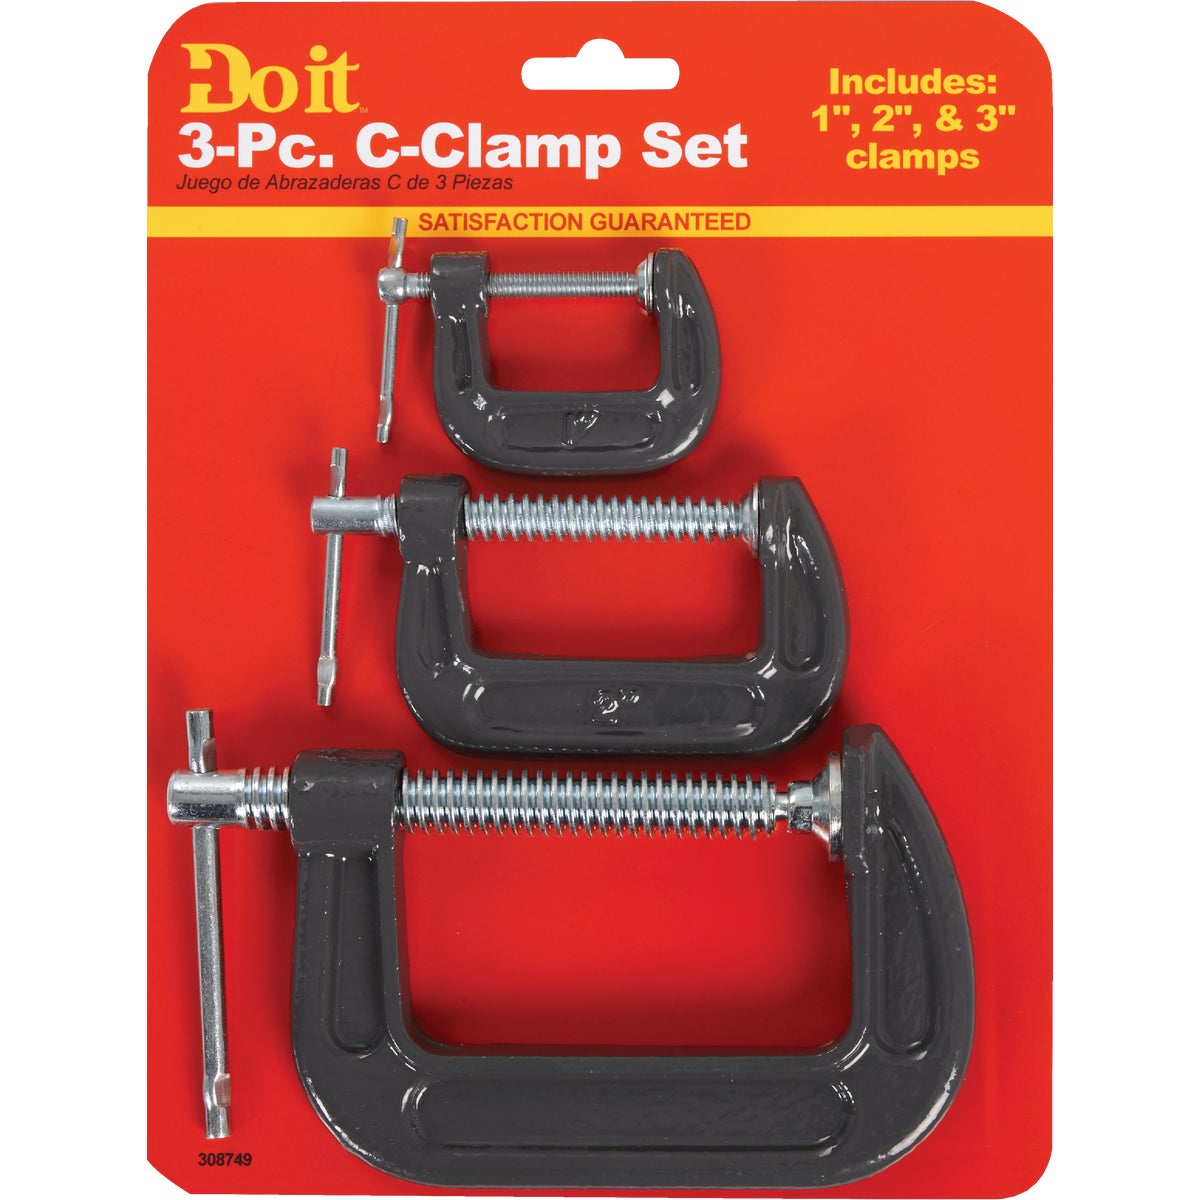 Item 308749, This 3-piece set includes 1 In., 2 In., and 3 In. C-clamps.